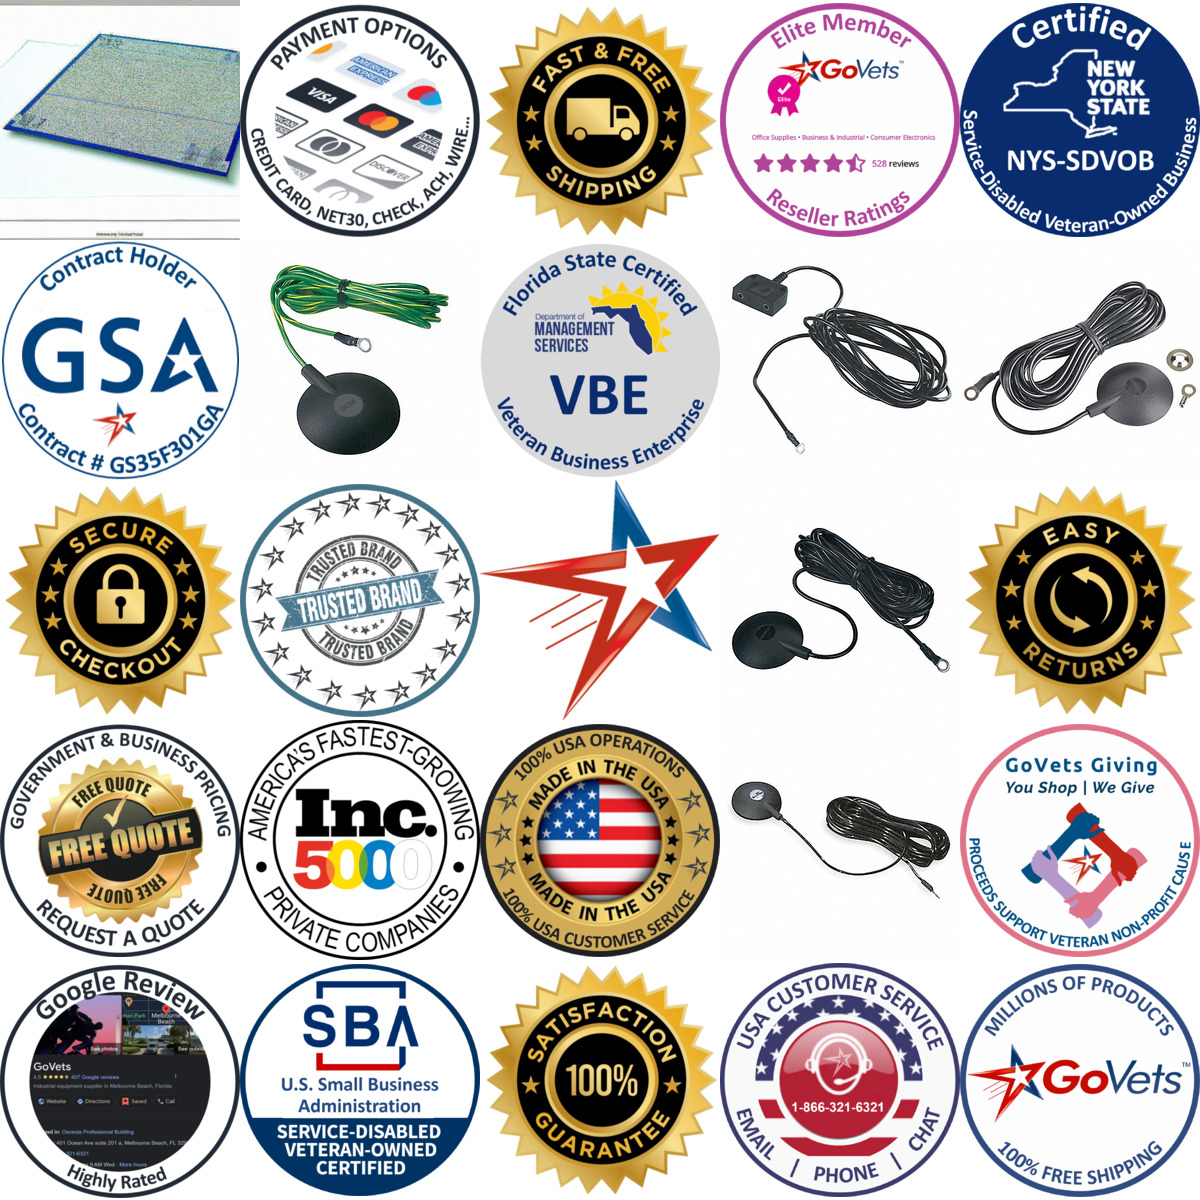 A selection of Grounding Cords products on GoVets